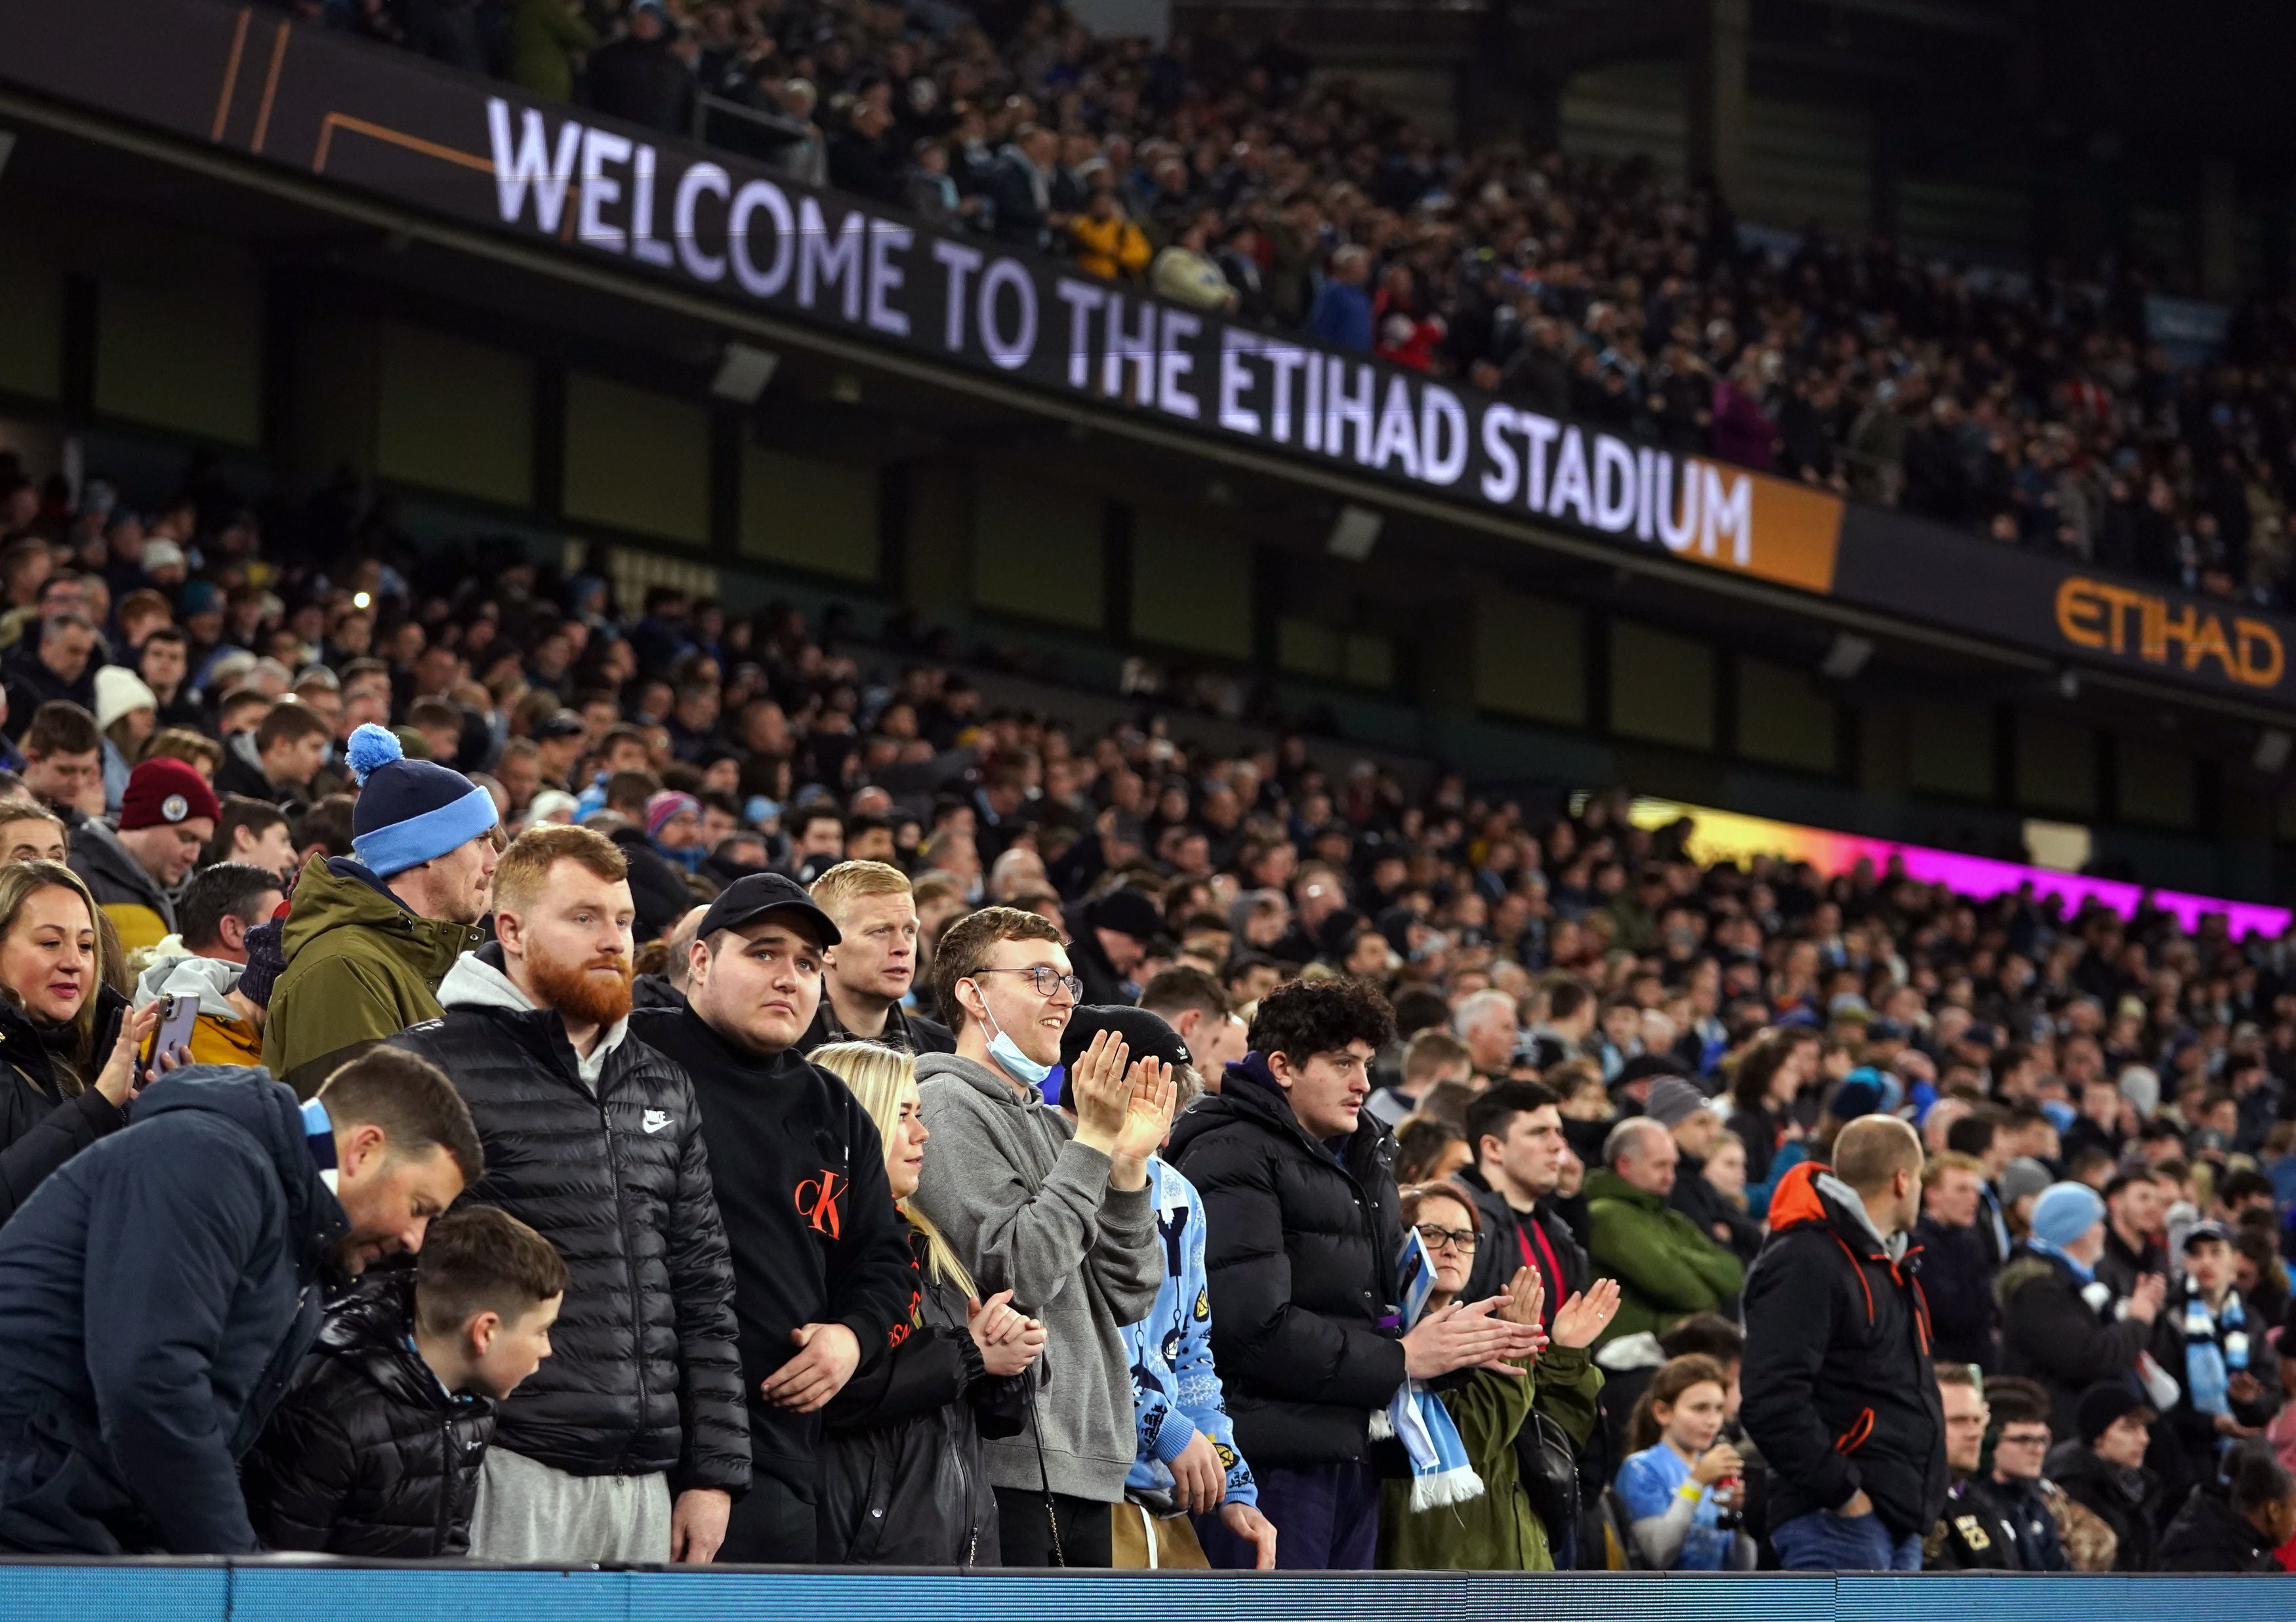 Manchester City fans at the Etihad Stadium earlier this week